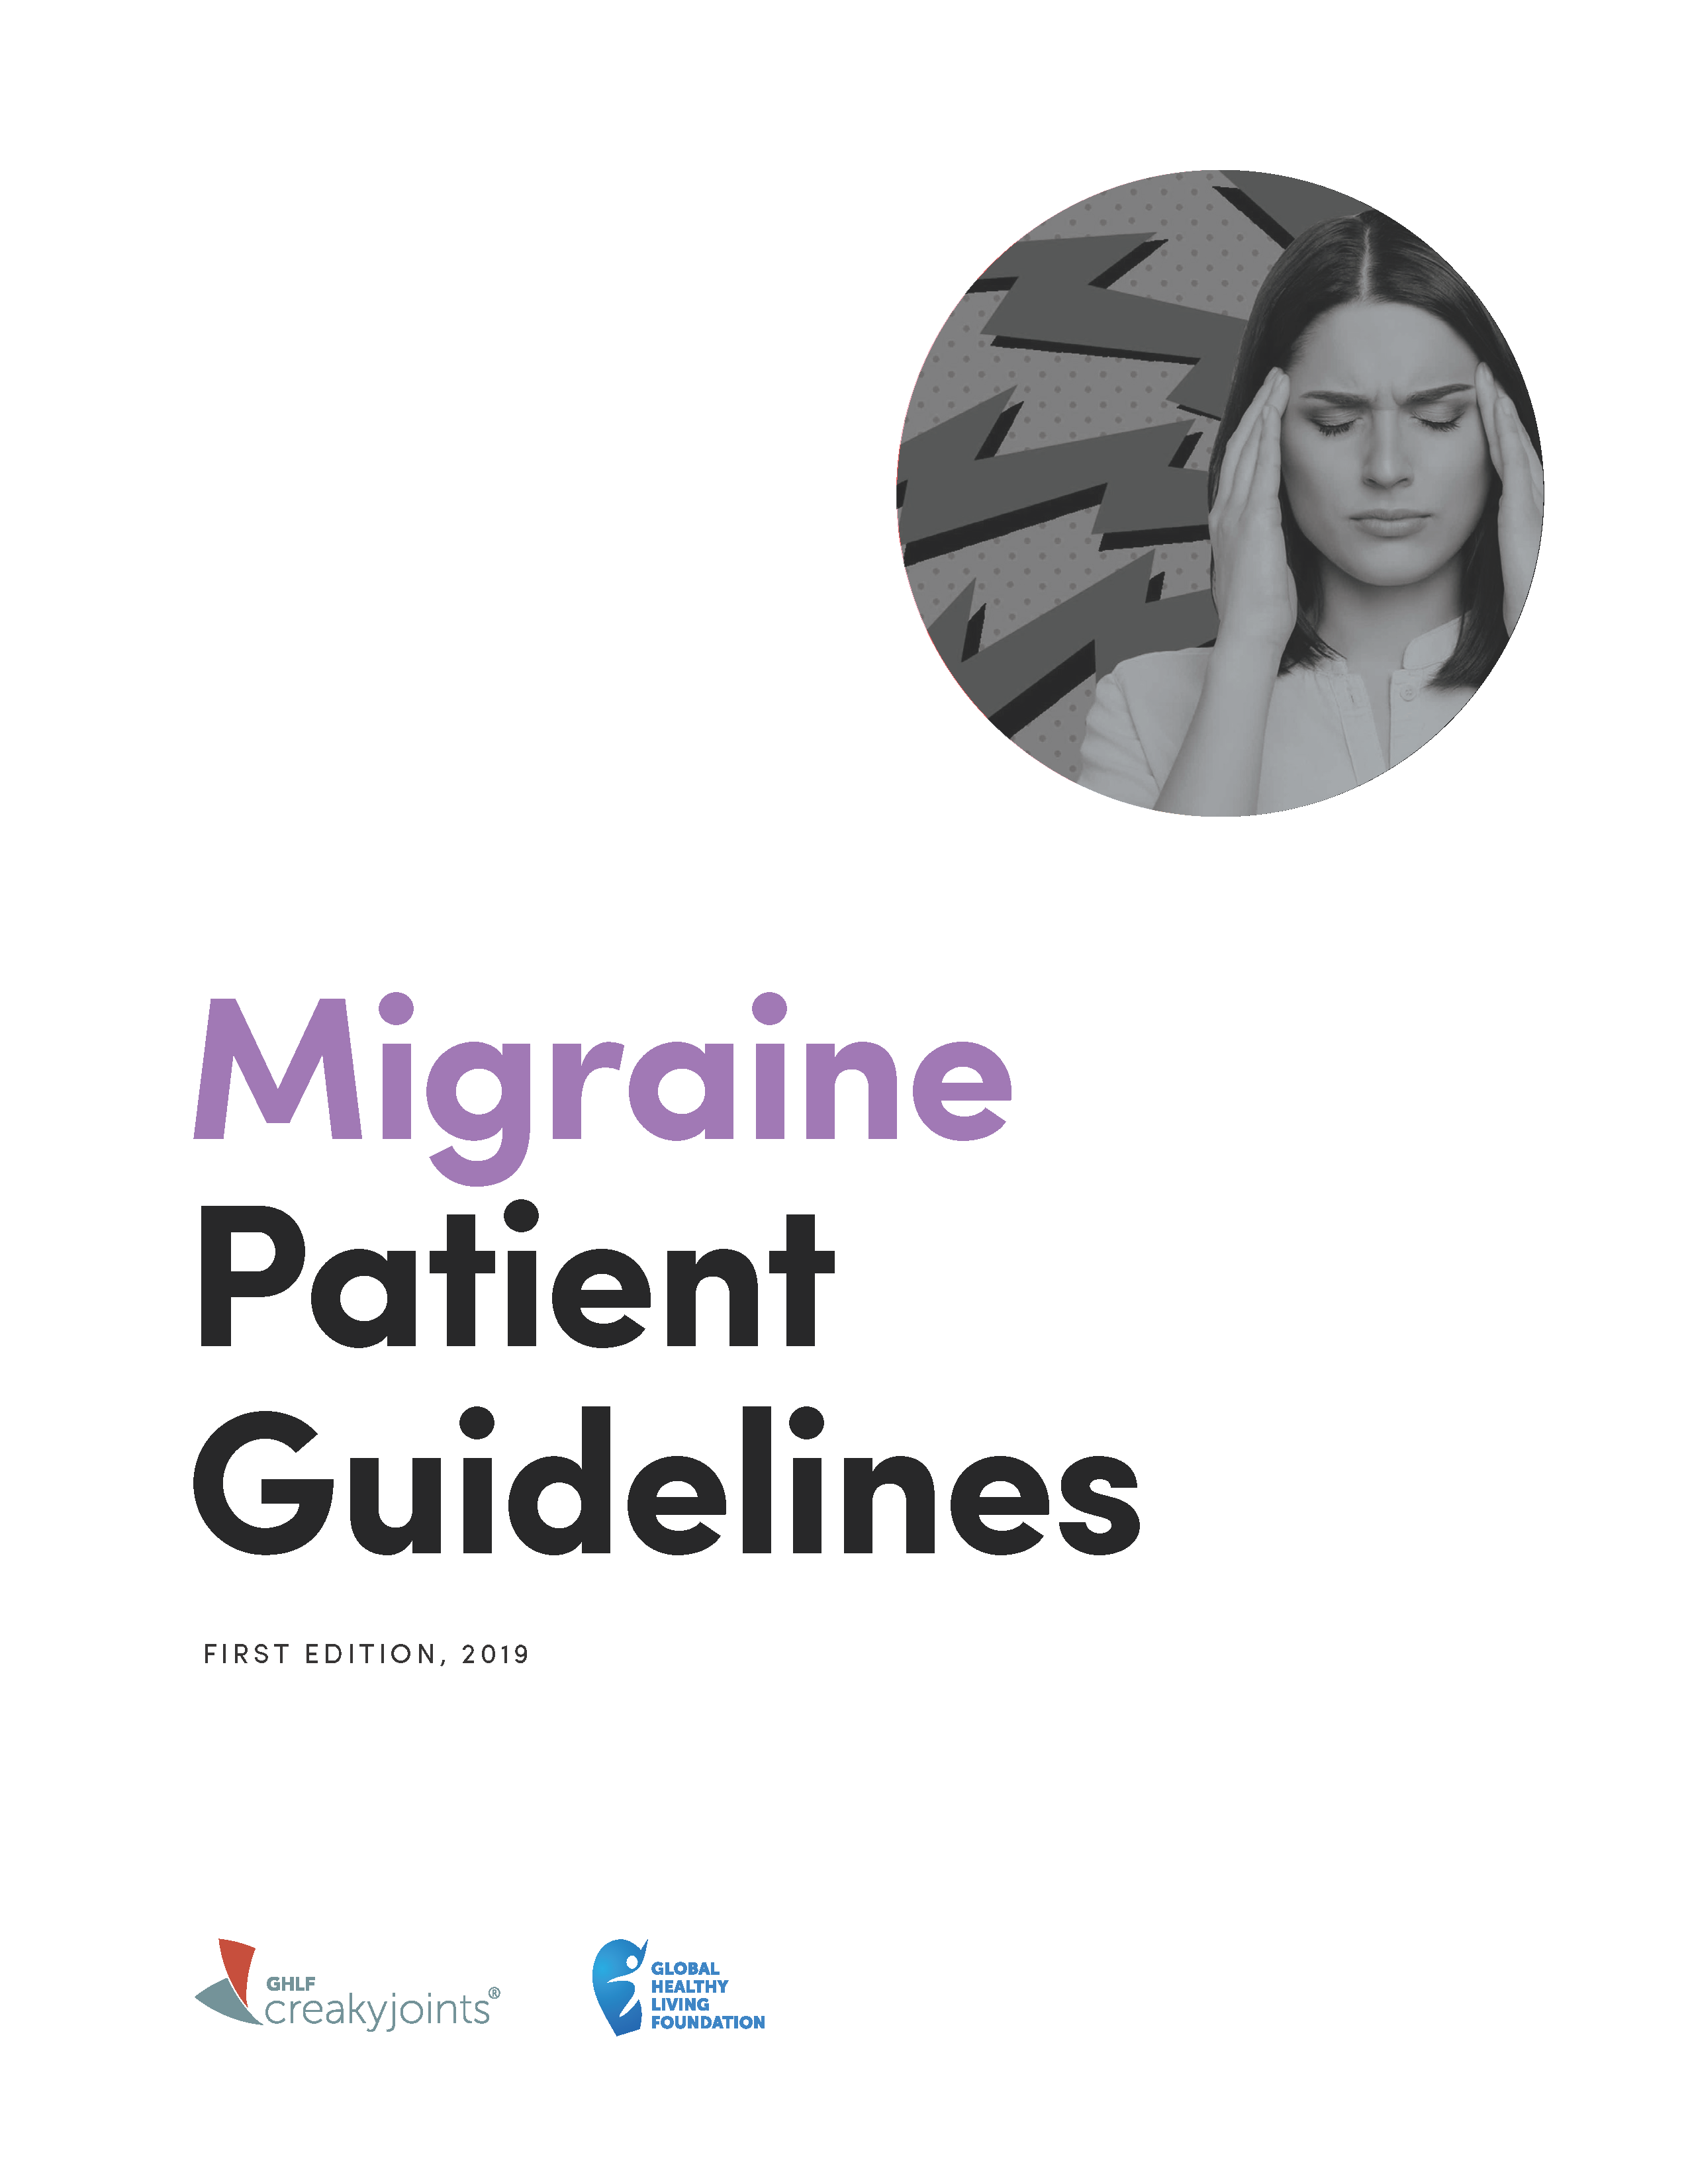 Migraine Patient Guidelines First Edition 2019 graphic